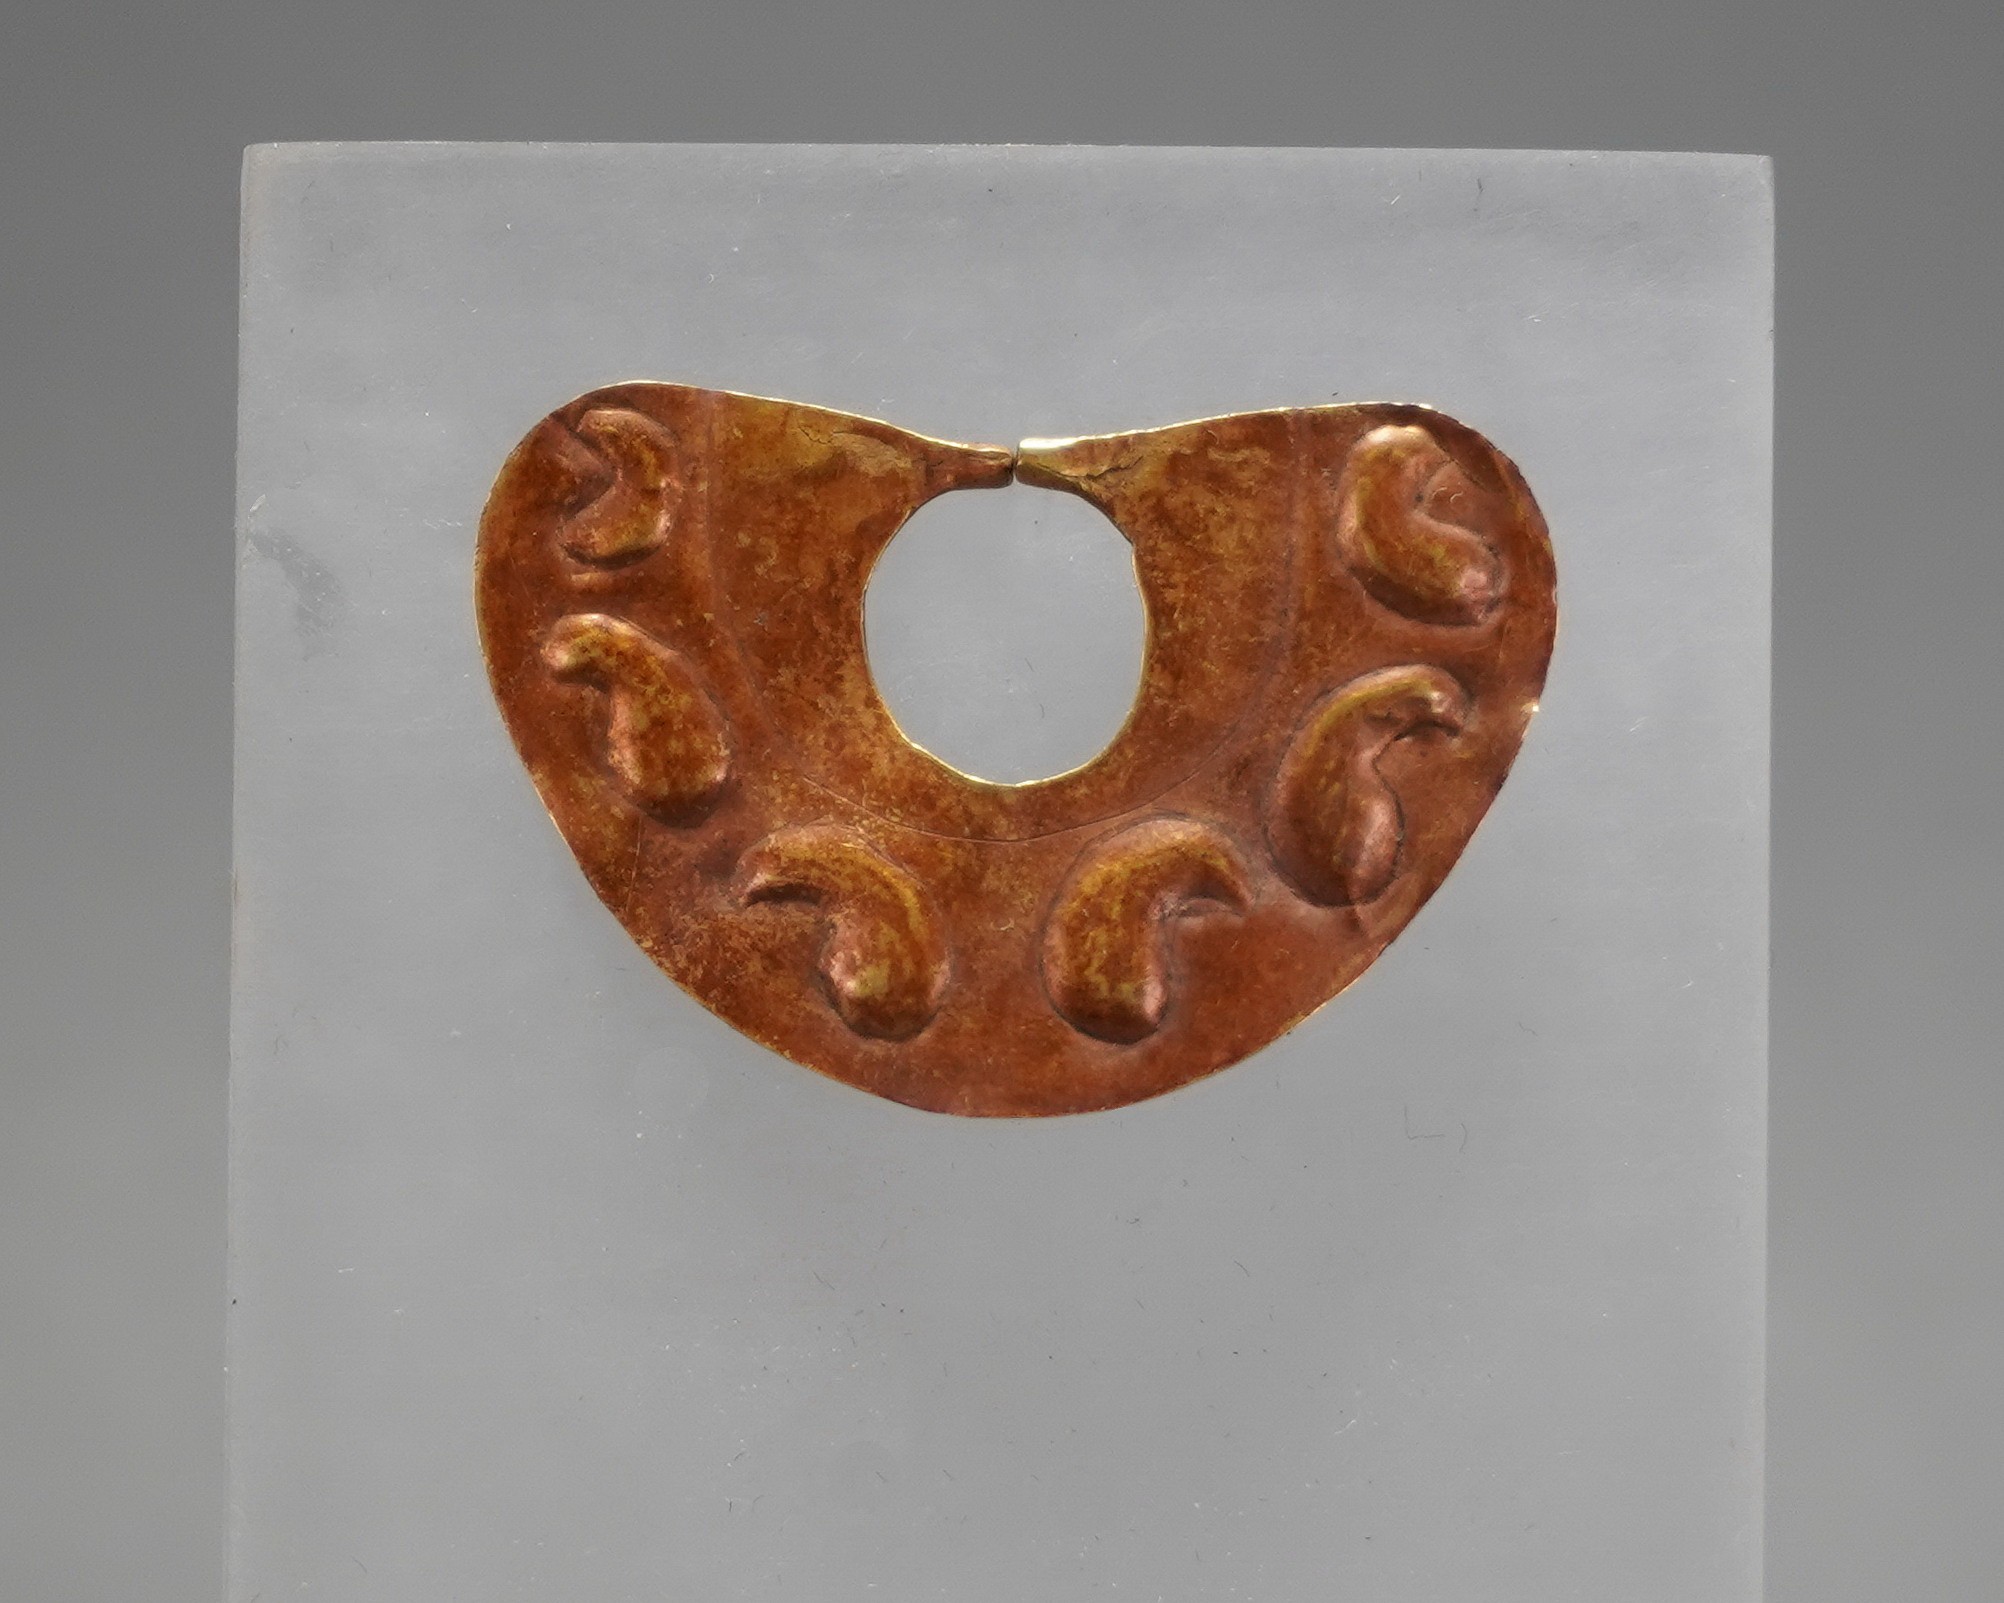 Peru, Moche Gold Nose Ornament with 6 Embossed Uculla Fruit
The Uculla fruit was an anti-coagulant to thin prisoners' blood for ritual ceremonies.  The patina contains ferric oxide from the soil in the vicinity of the burial site, which gives the gold ornament its beautiful red patina.  This piece was hammered from a soft sheet of pure gold.  Small gold ornaments such as this required excellent craftsmanship to execute.
n9056